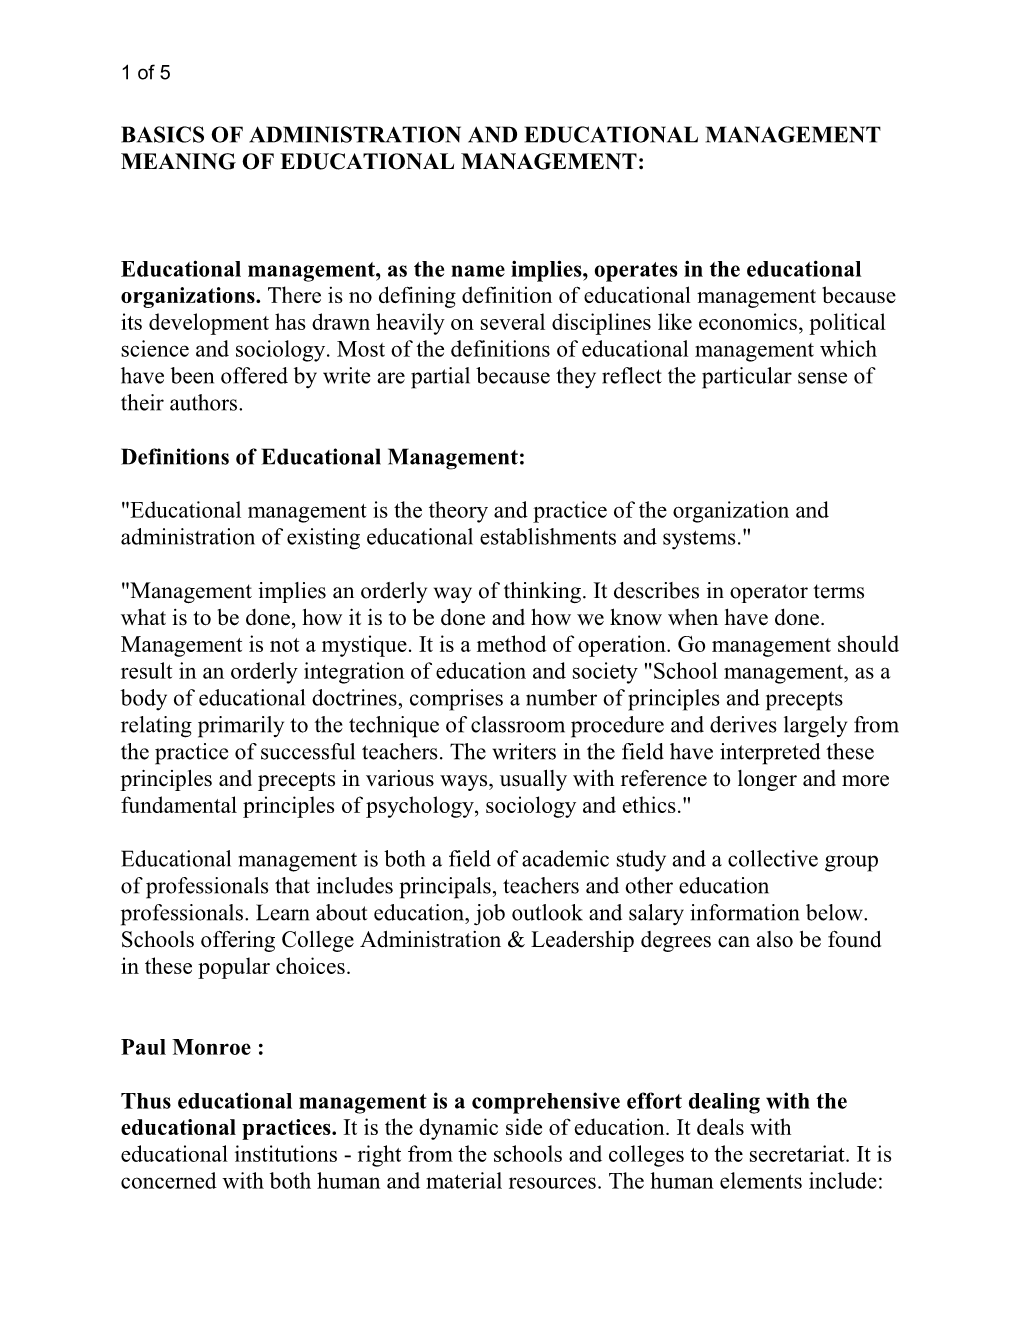 Basics of Administration and Educational Management Meaning of Educational Management